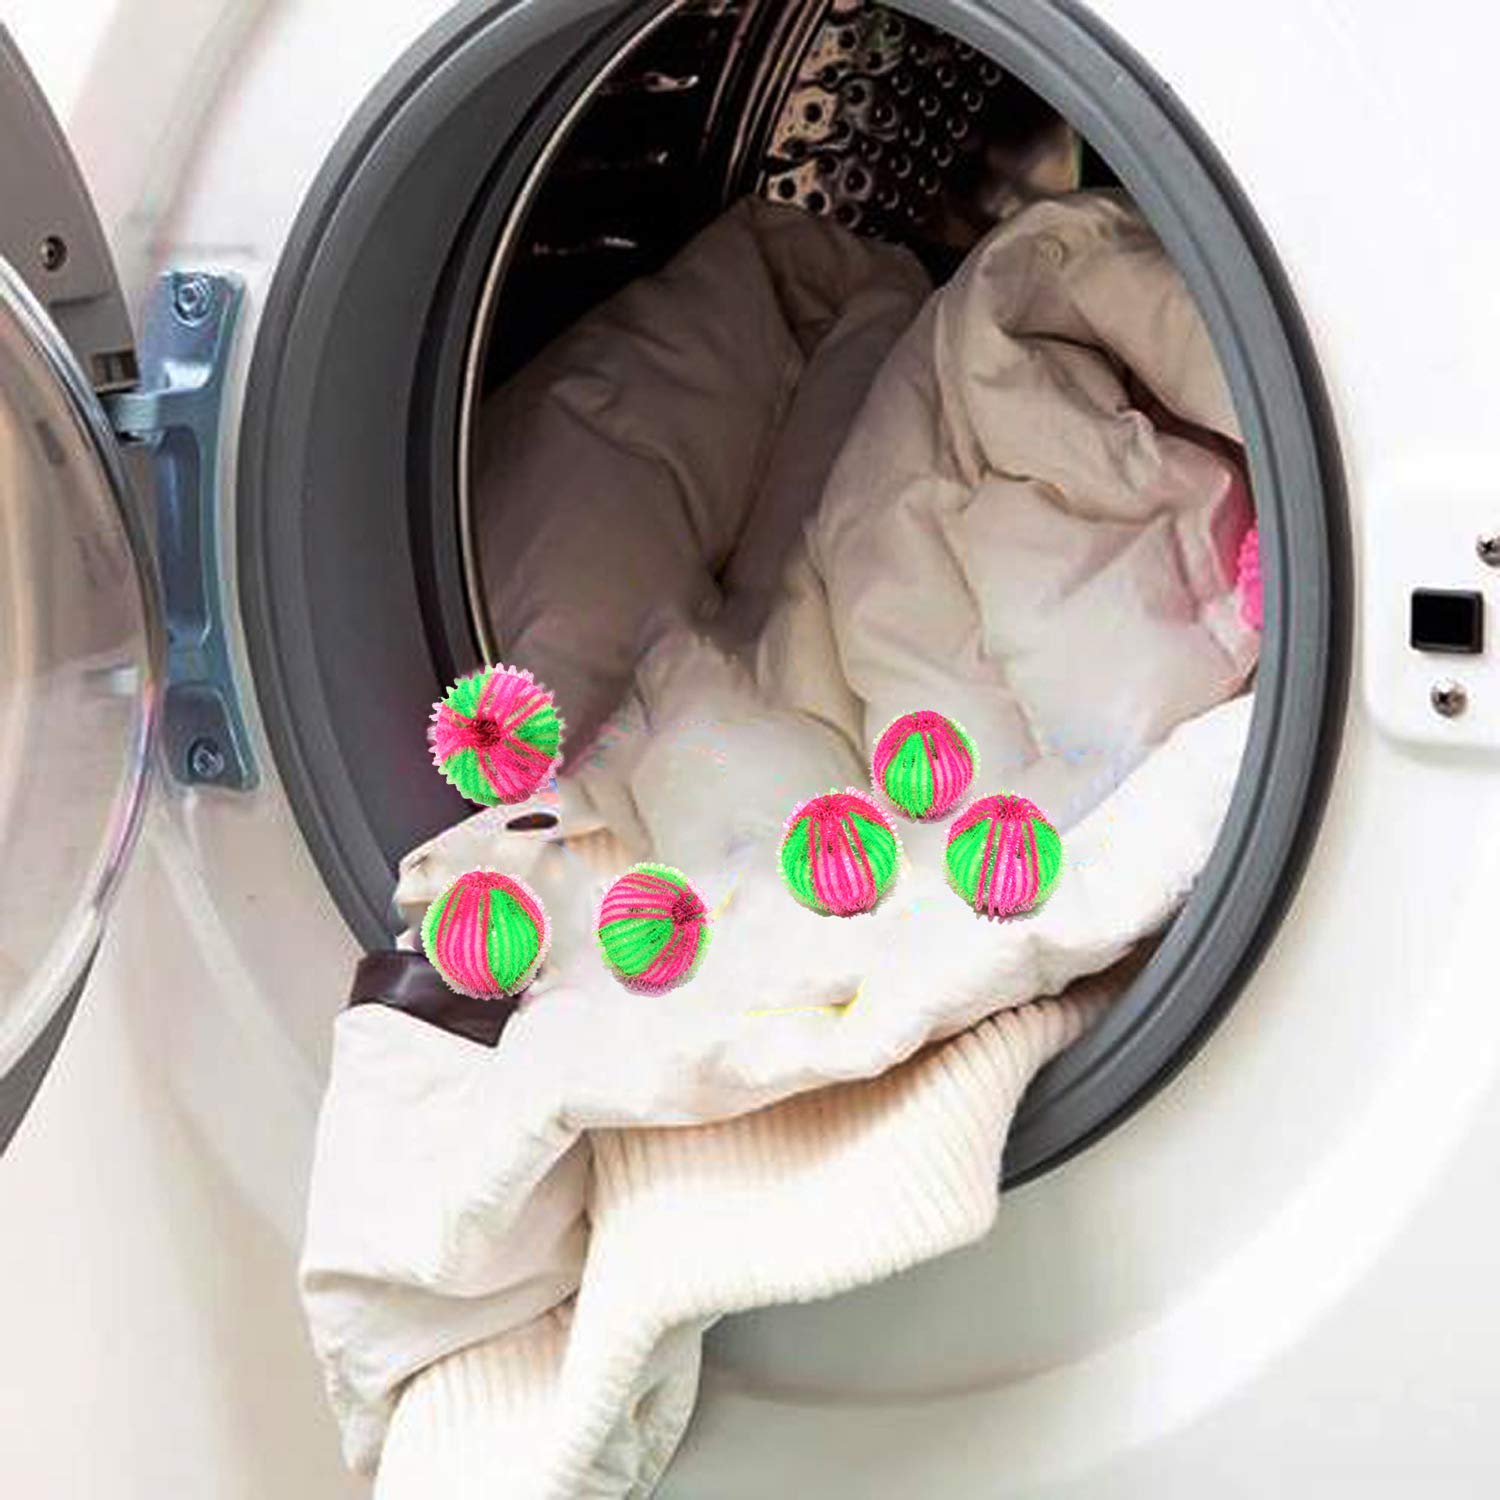 How to Remove Hair From Laundry